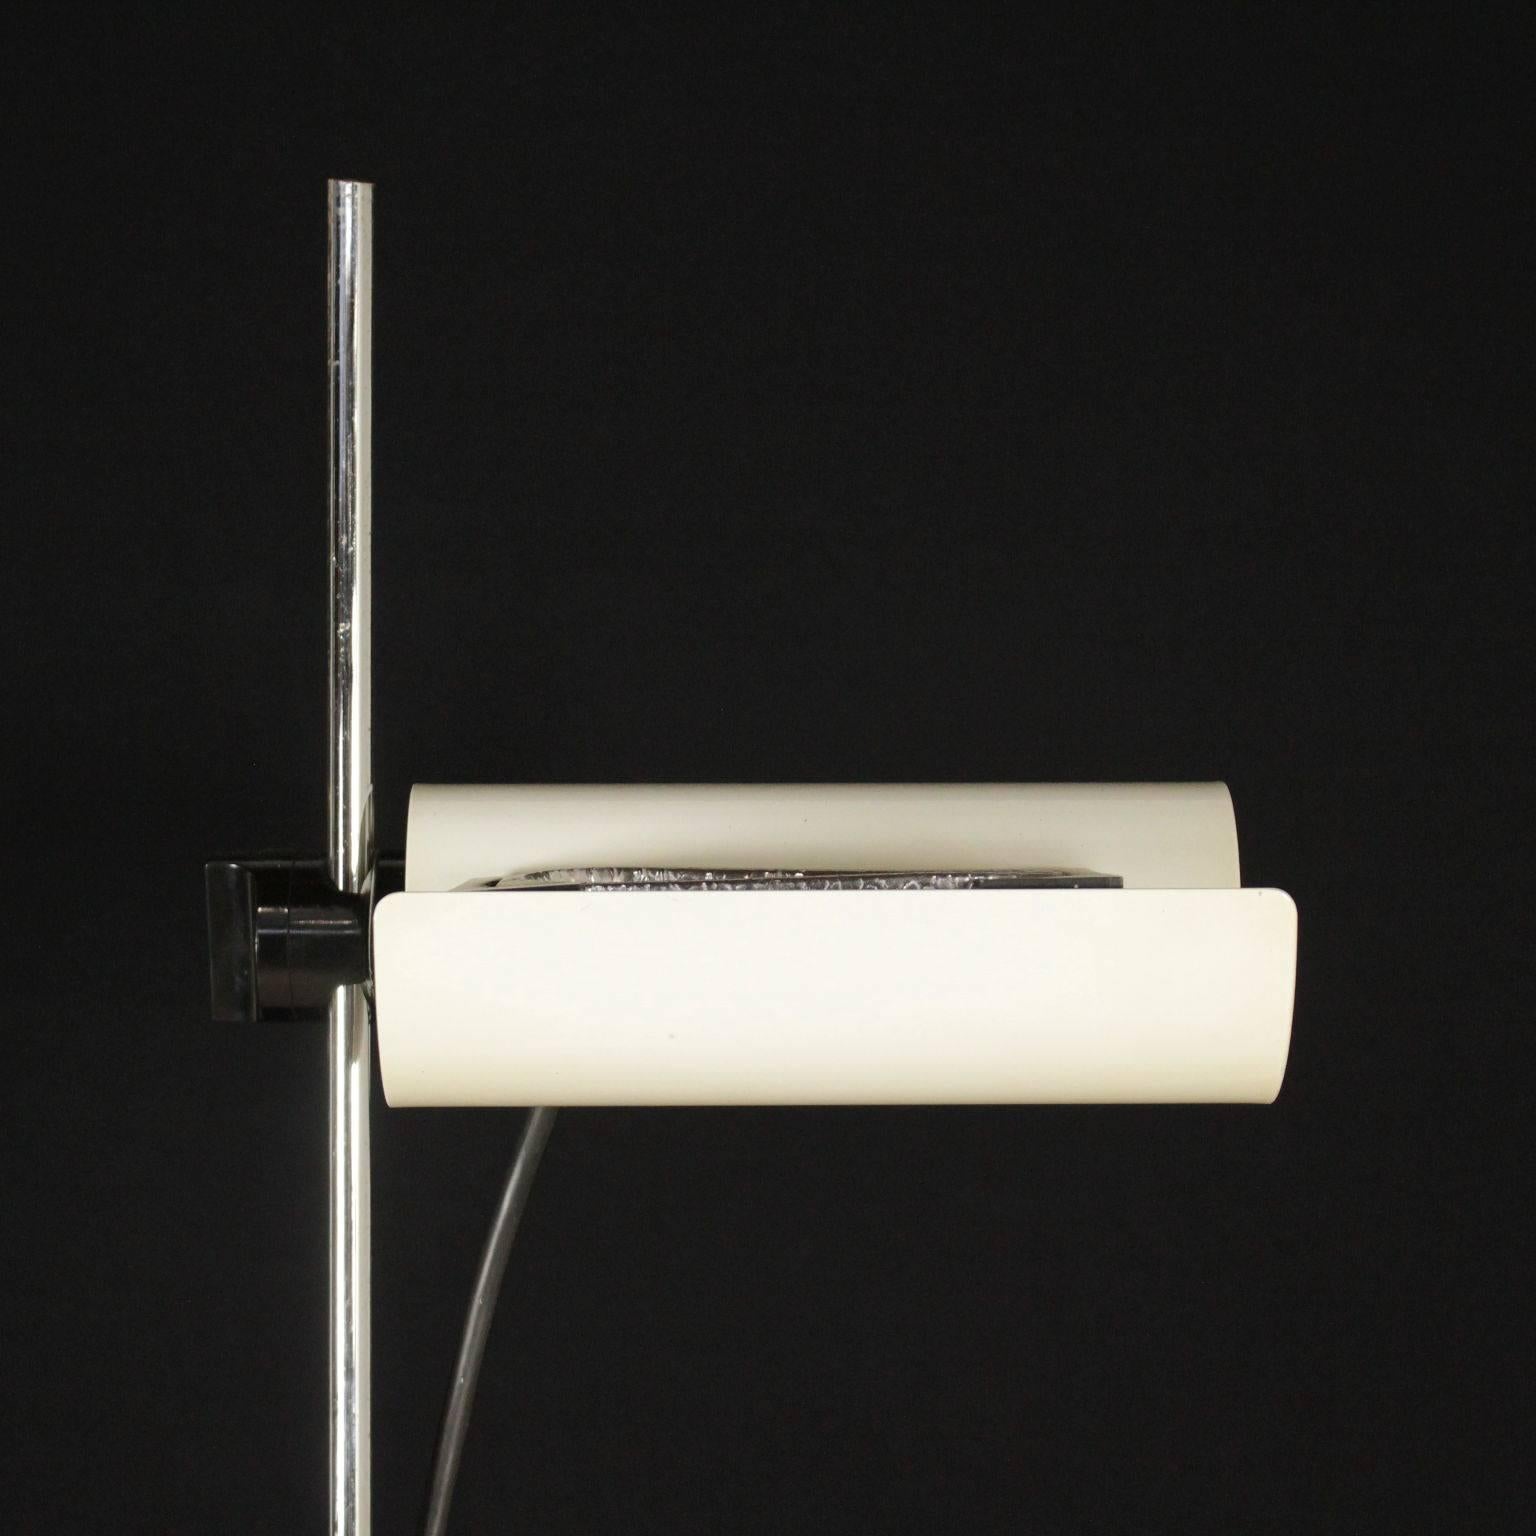 A floor lamp designed by Vico Magistretti for Oluce. Chromed metal, lacquered aluminum adjustable reflector. Manufactured in Italy, 1980s. Model: DIM 333.